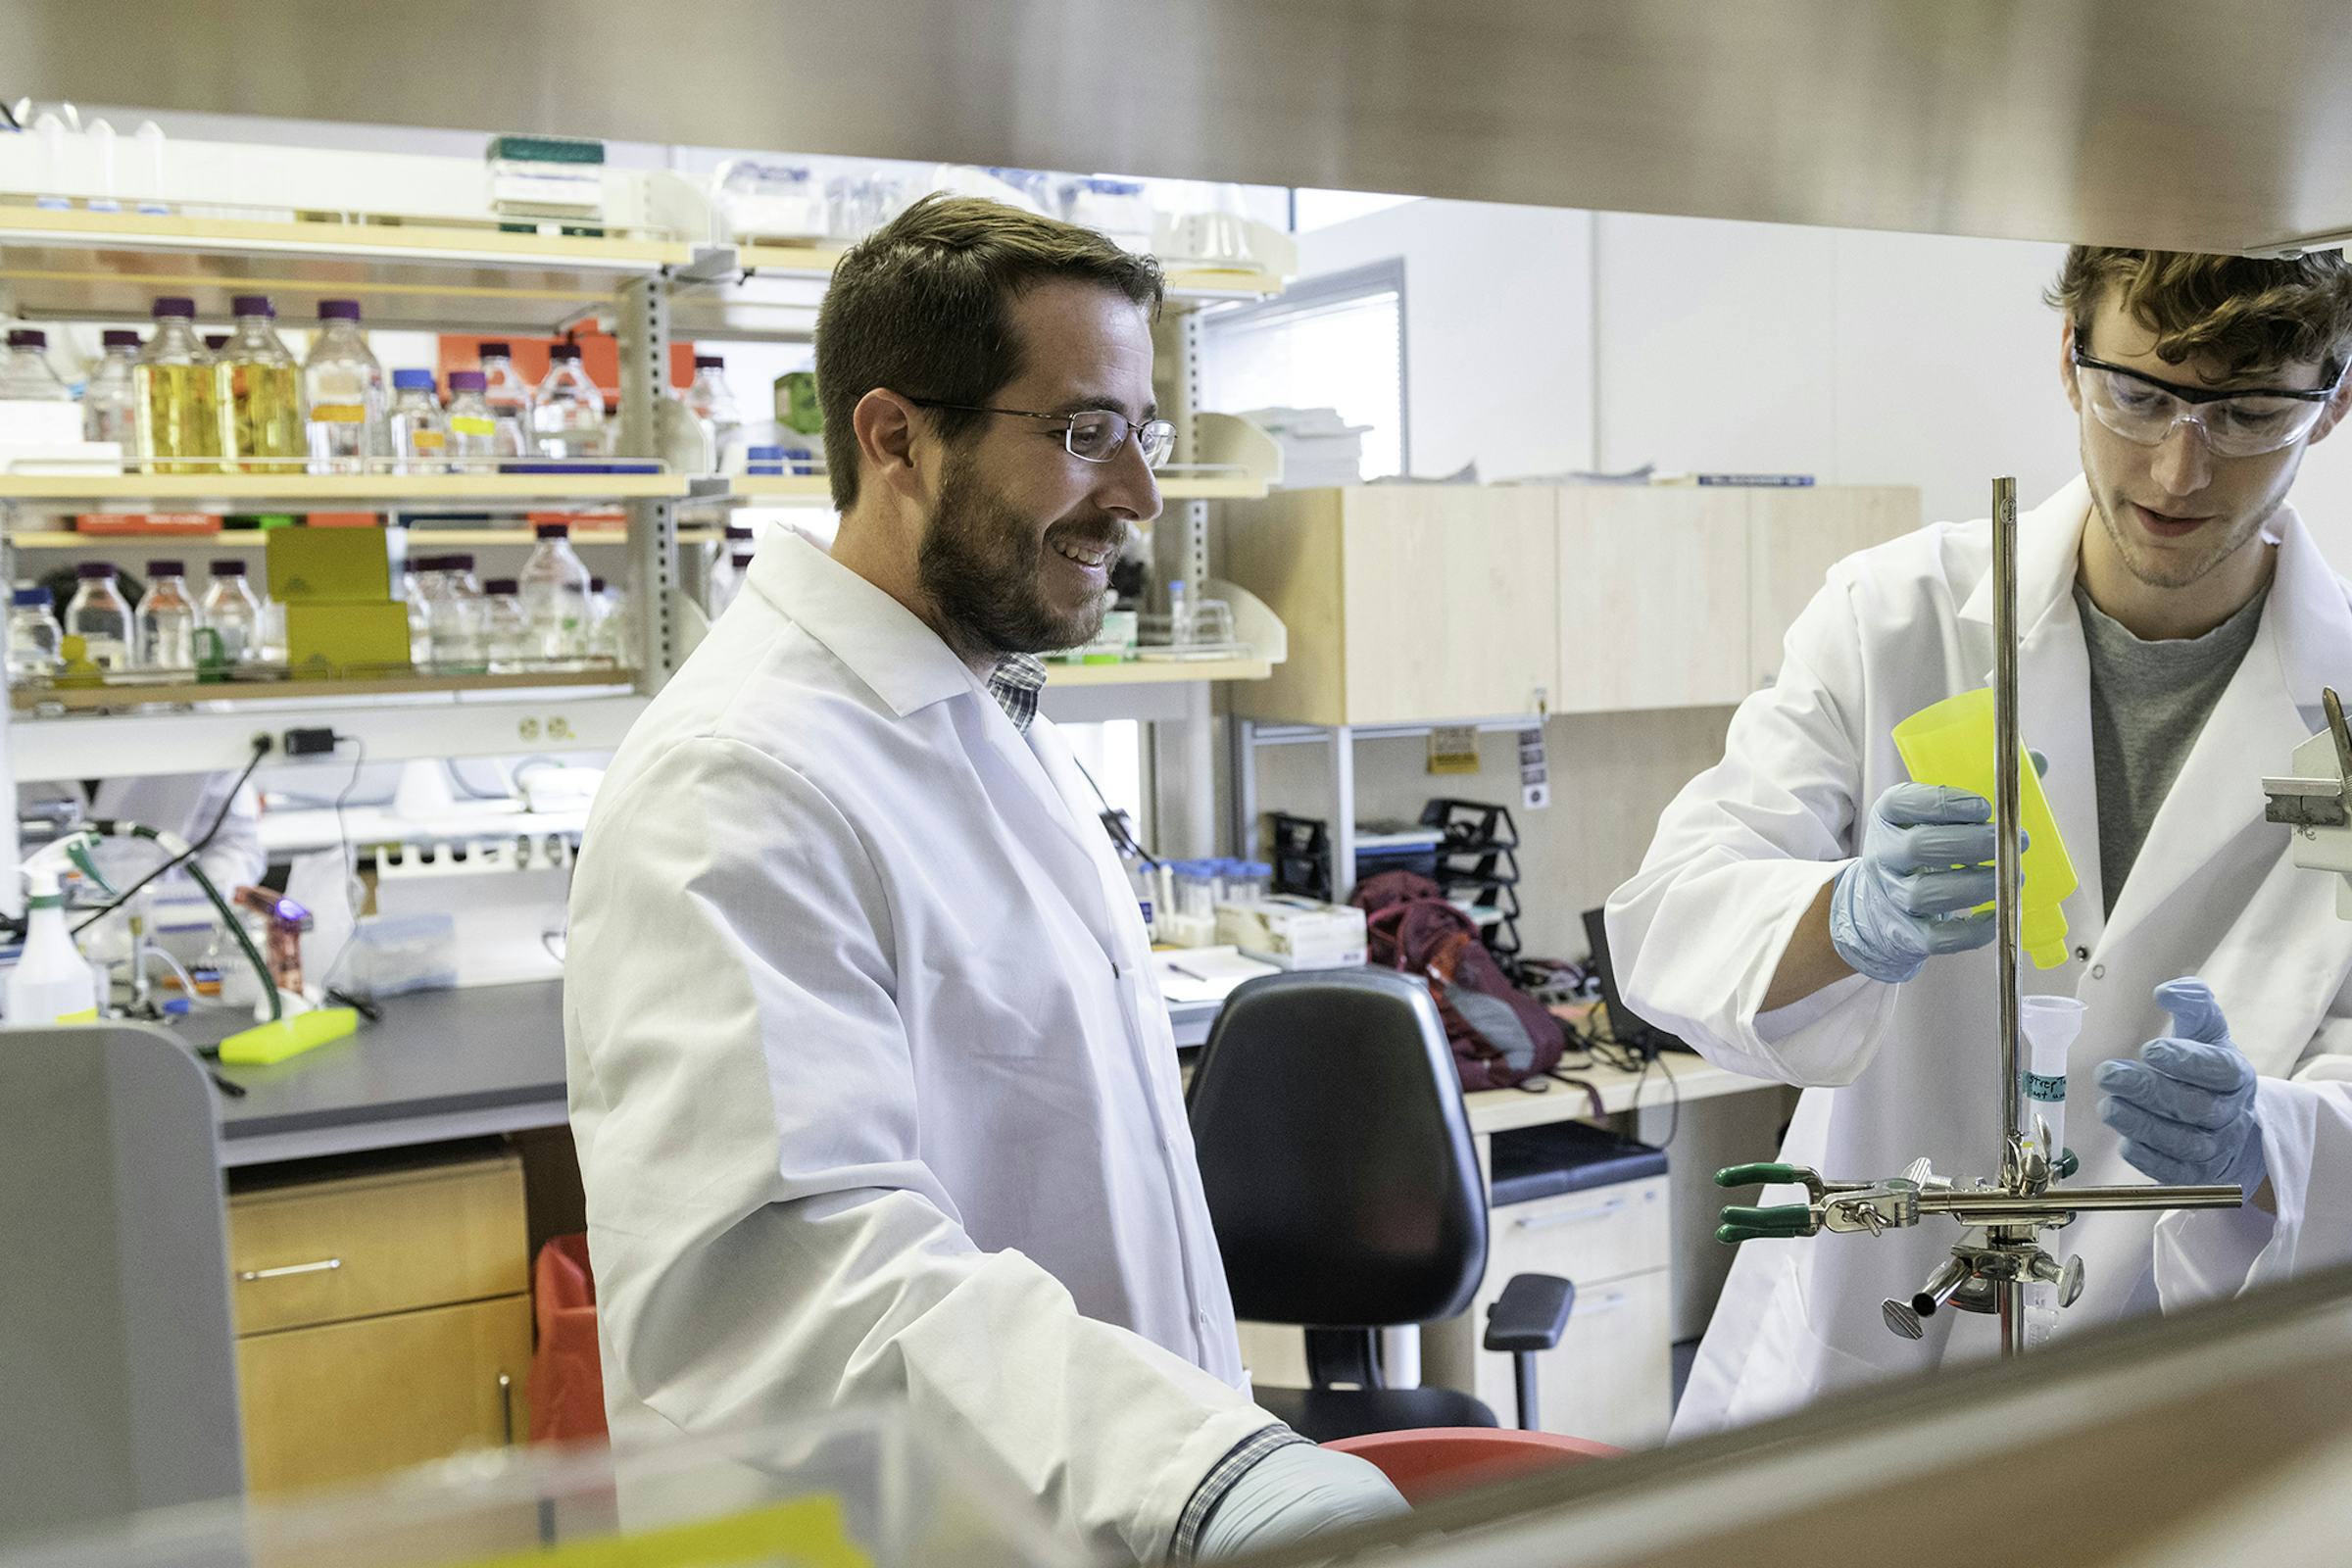 Two scientists in lab coats work at a lab bench.